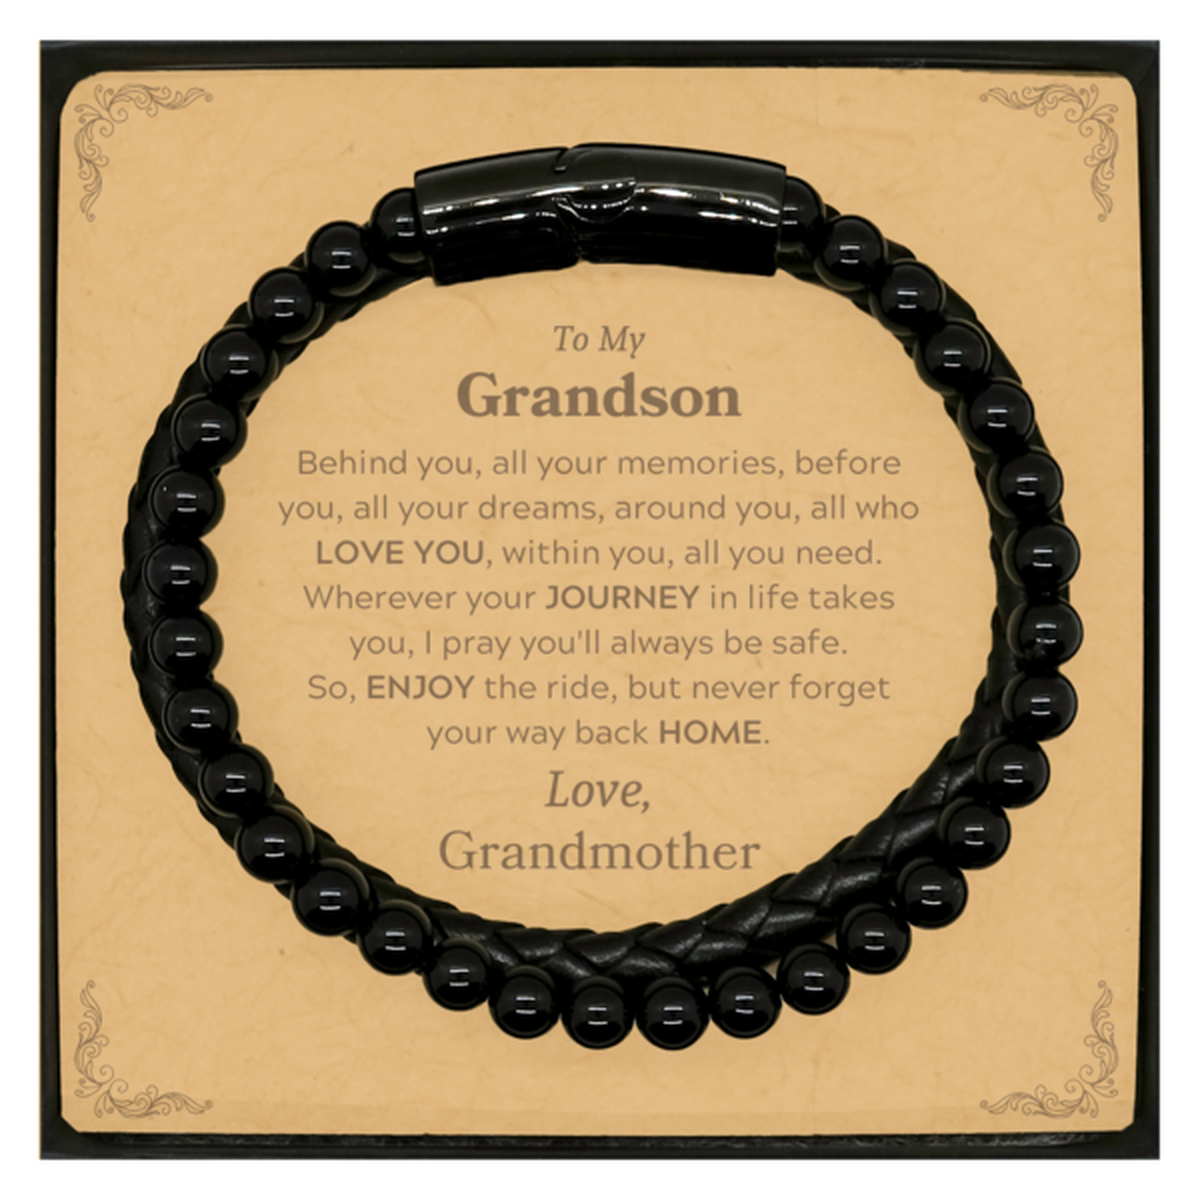 To My Grandson Graduation Gifts from Grandmother, Grandson Stone Leather Bracelets Christmas Birthday Gifts for Grandson Behind you, all your memories, before you, all your dreams. Love, Grandmother